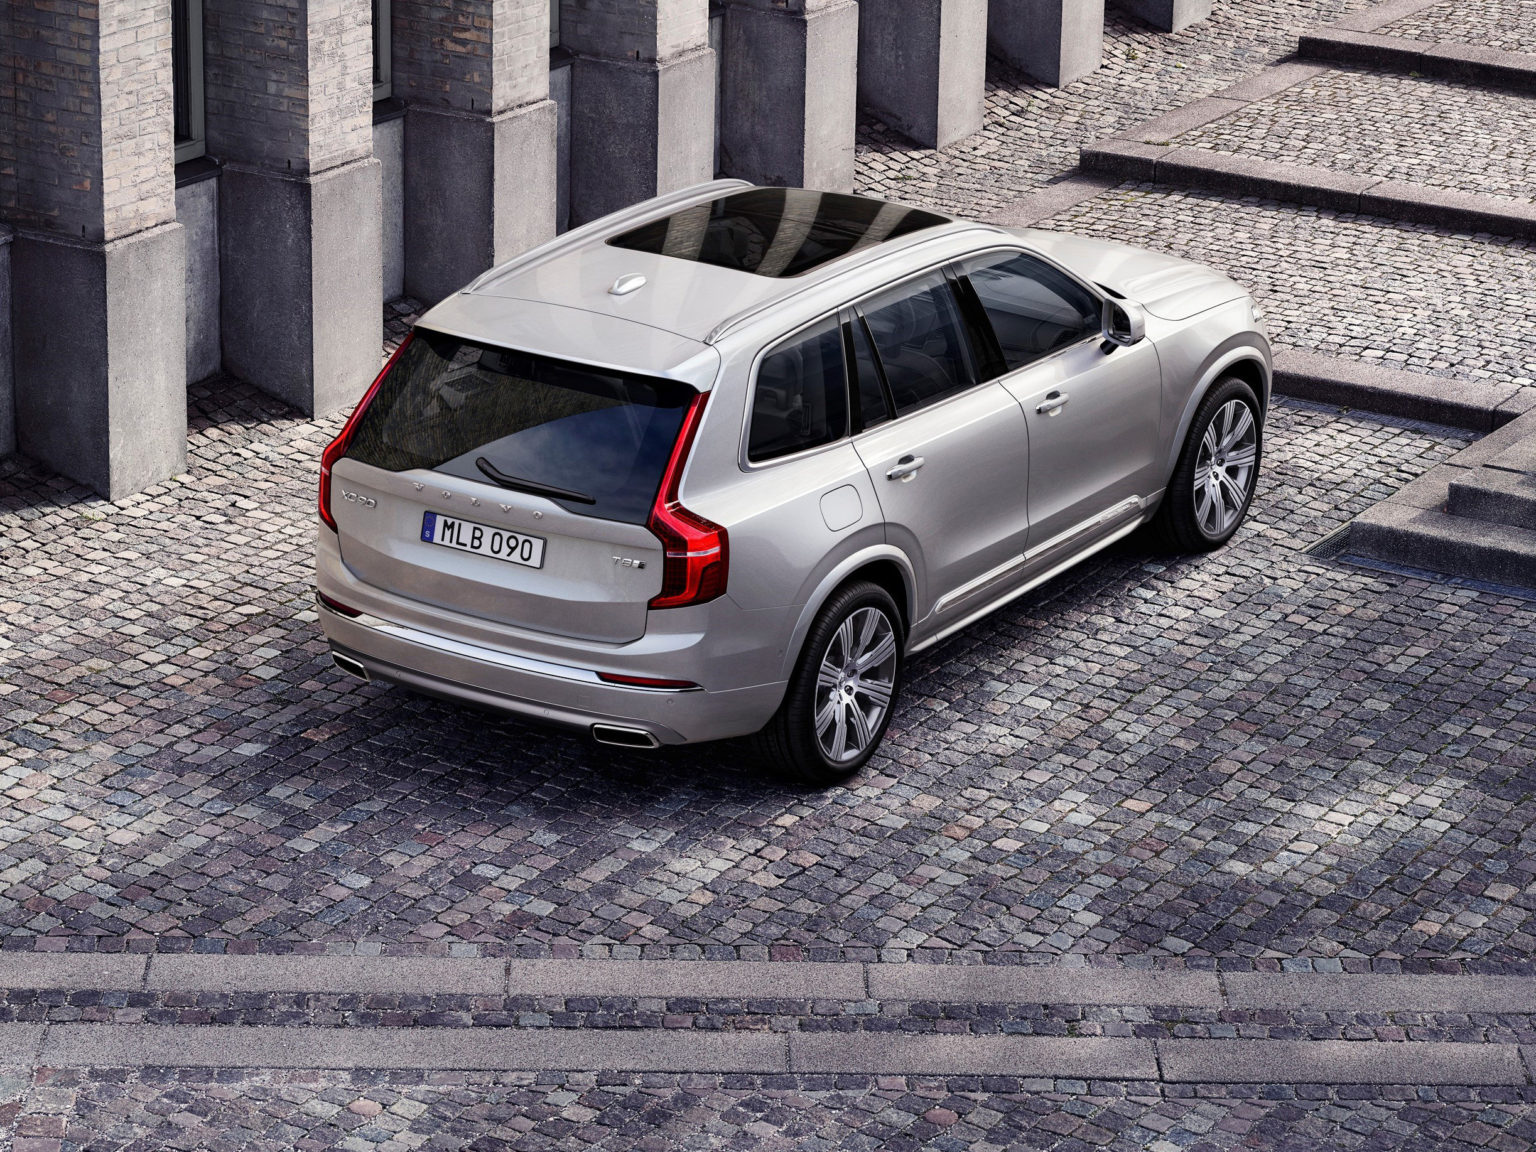 The Volvo XC90 T8 is a plug-in hybrid SUV.